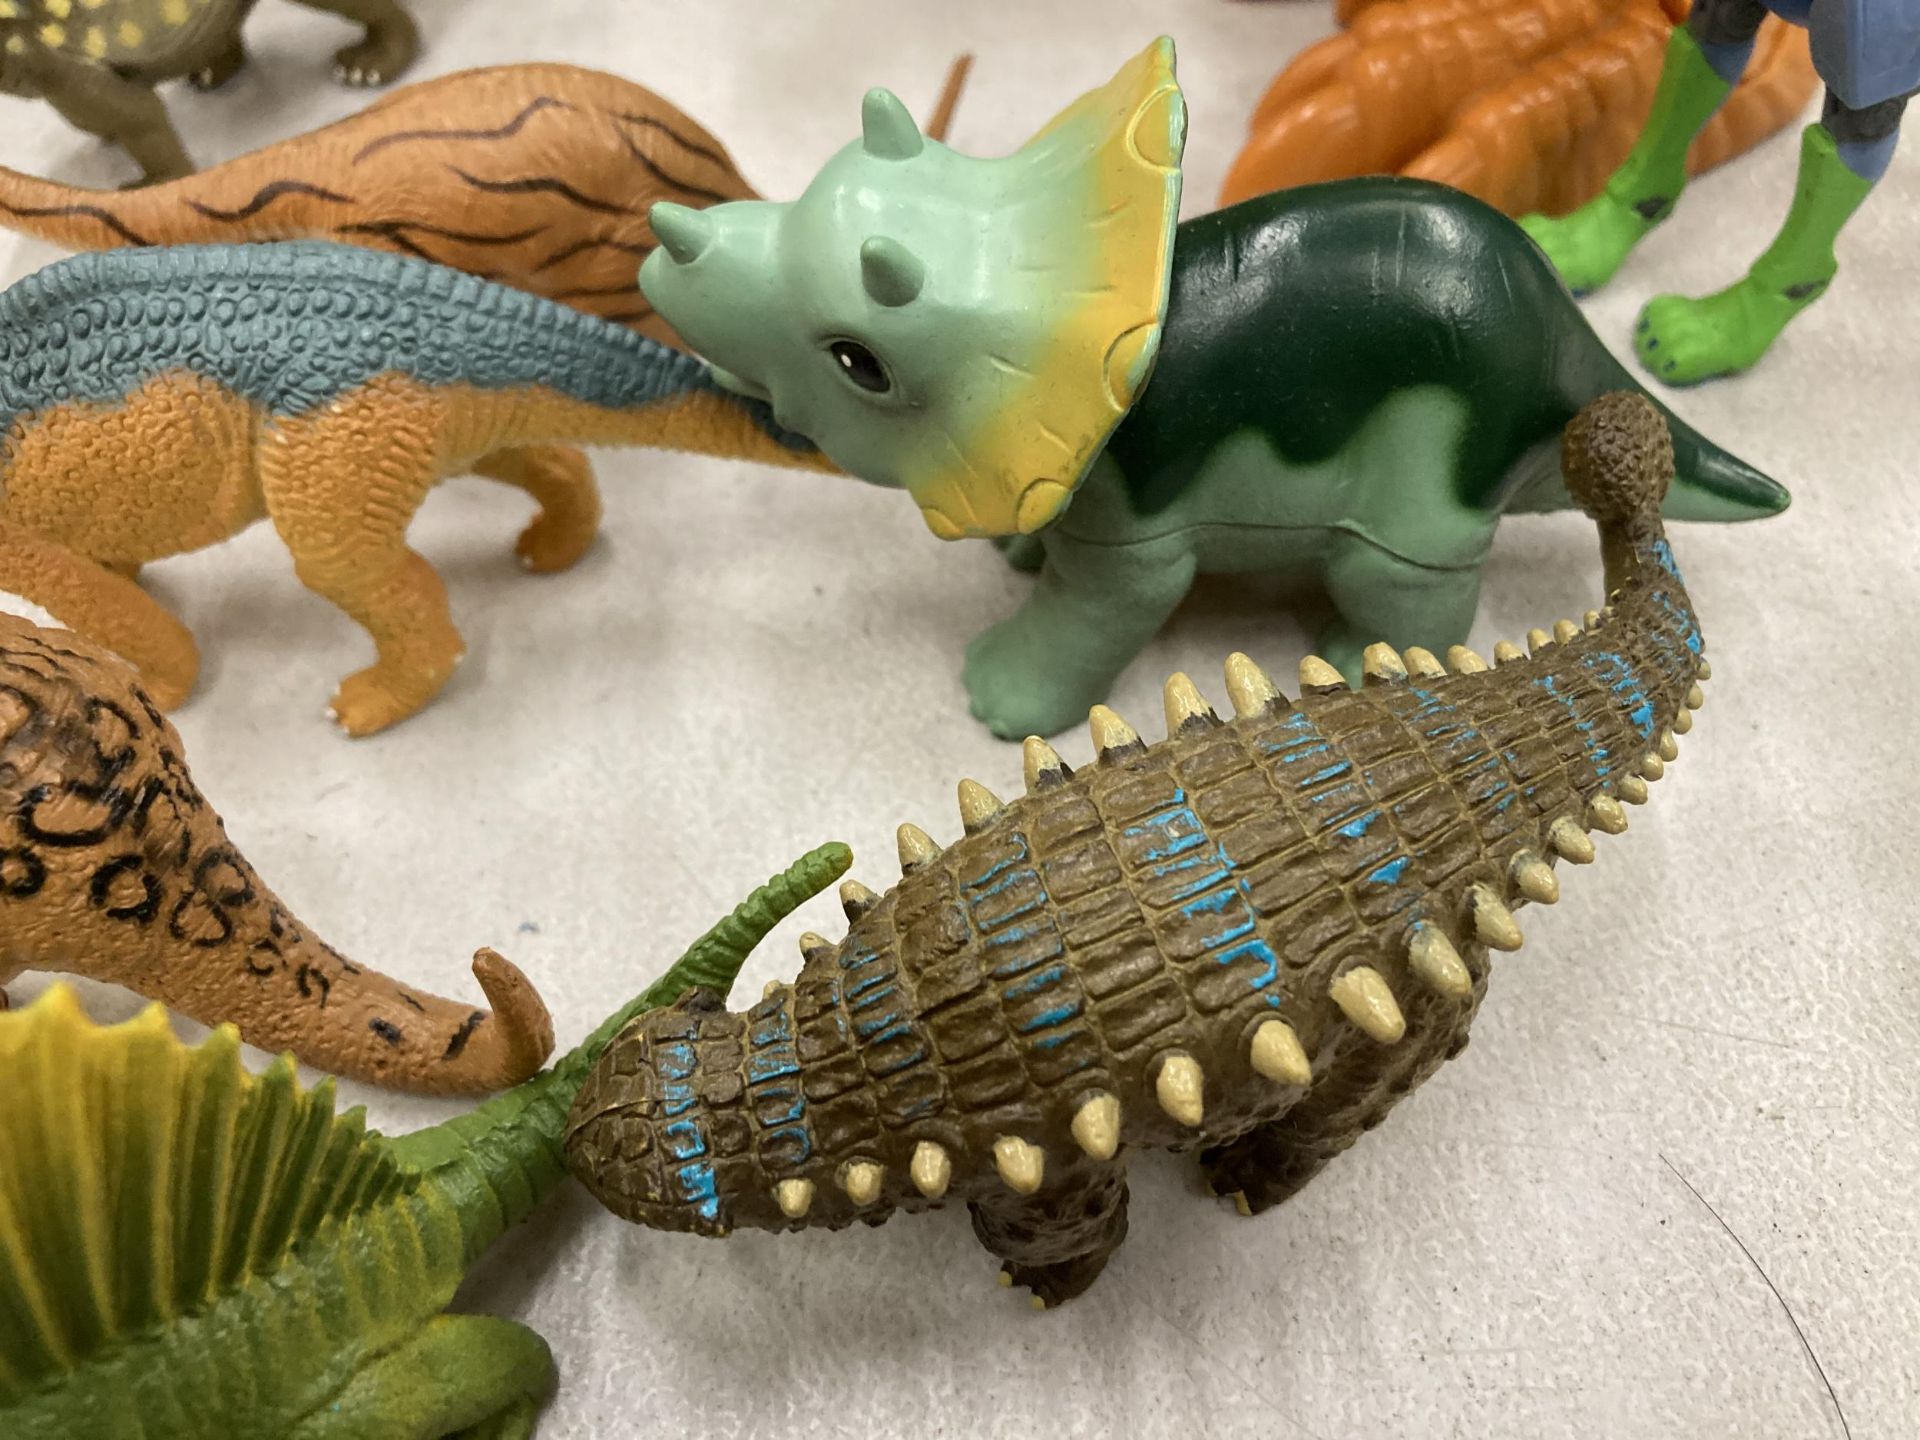 A COLLECTION OF DINOSAURS, ETC IN A BASKET - Image 5 of 5